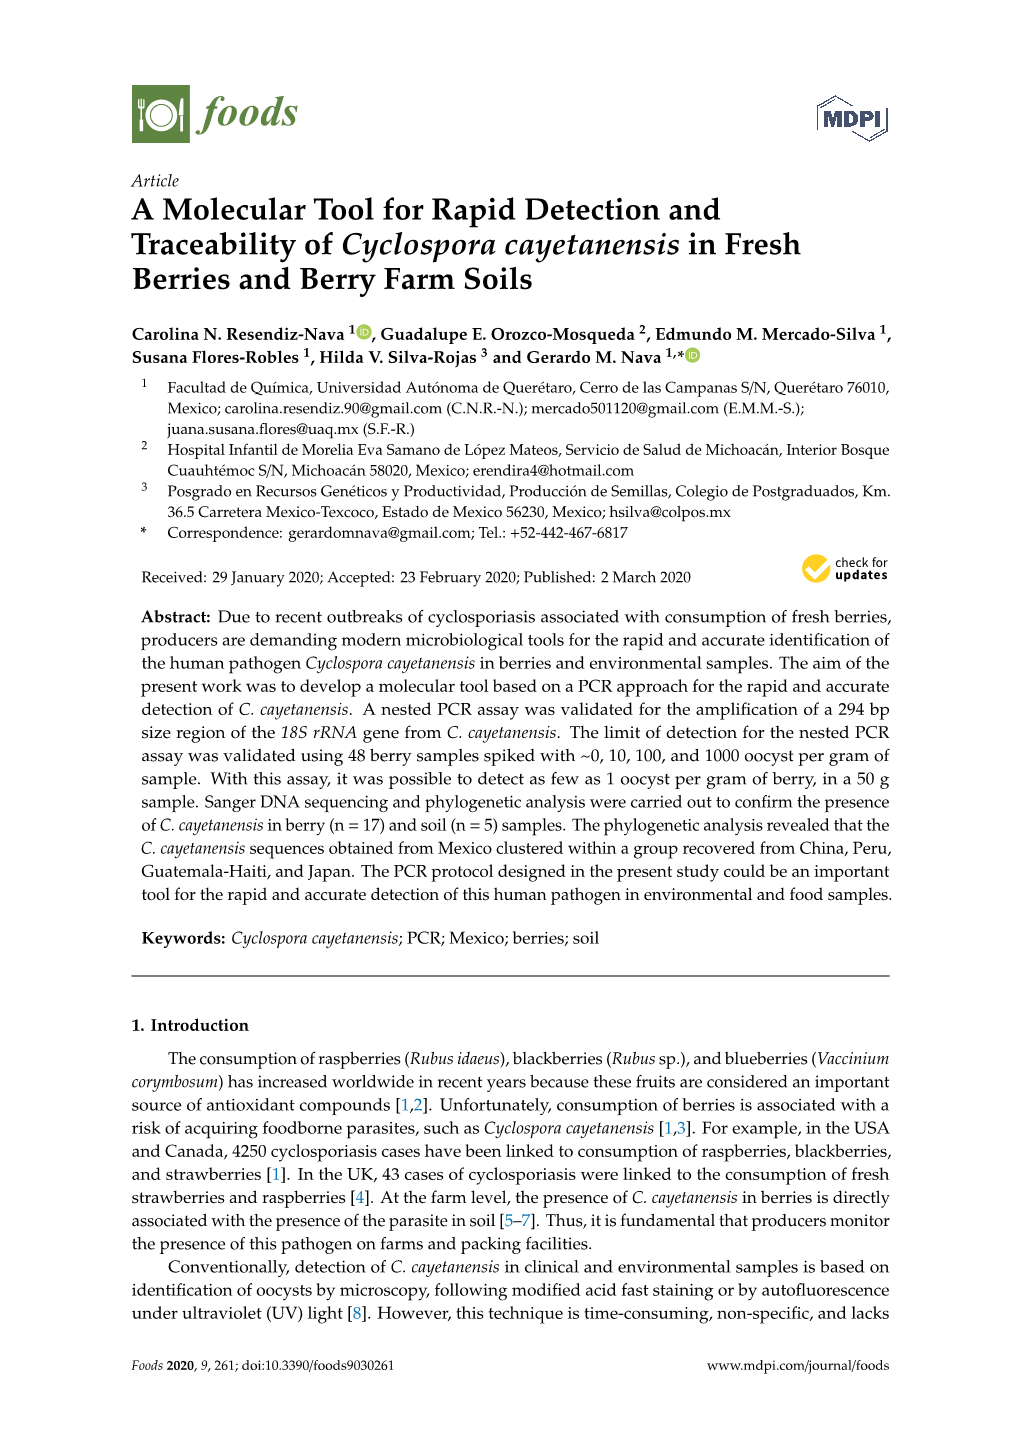 A Molecular Tool for Rapid Detection and Traceability of Cyclospora Cayetanensis in Fresh Berries and Berry Farm Soils